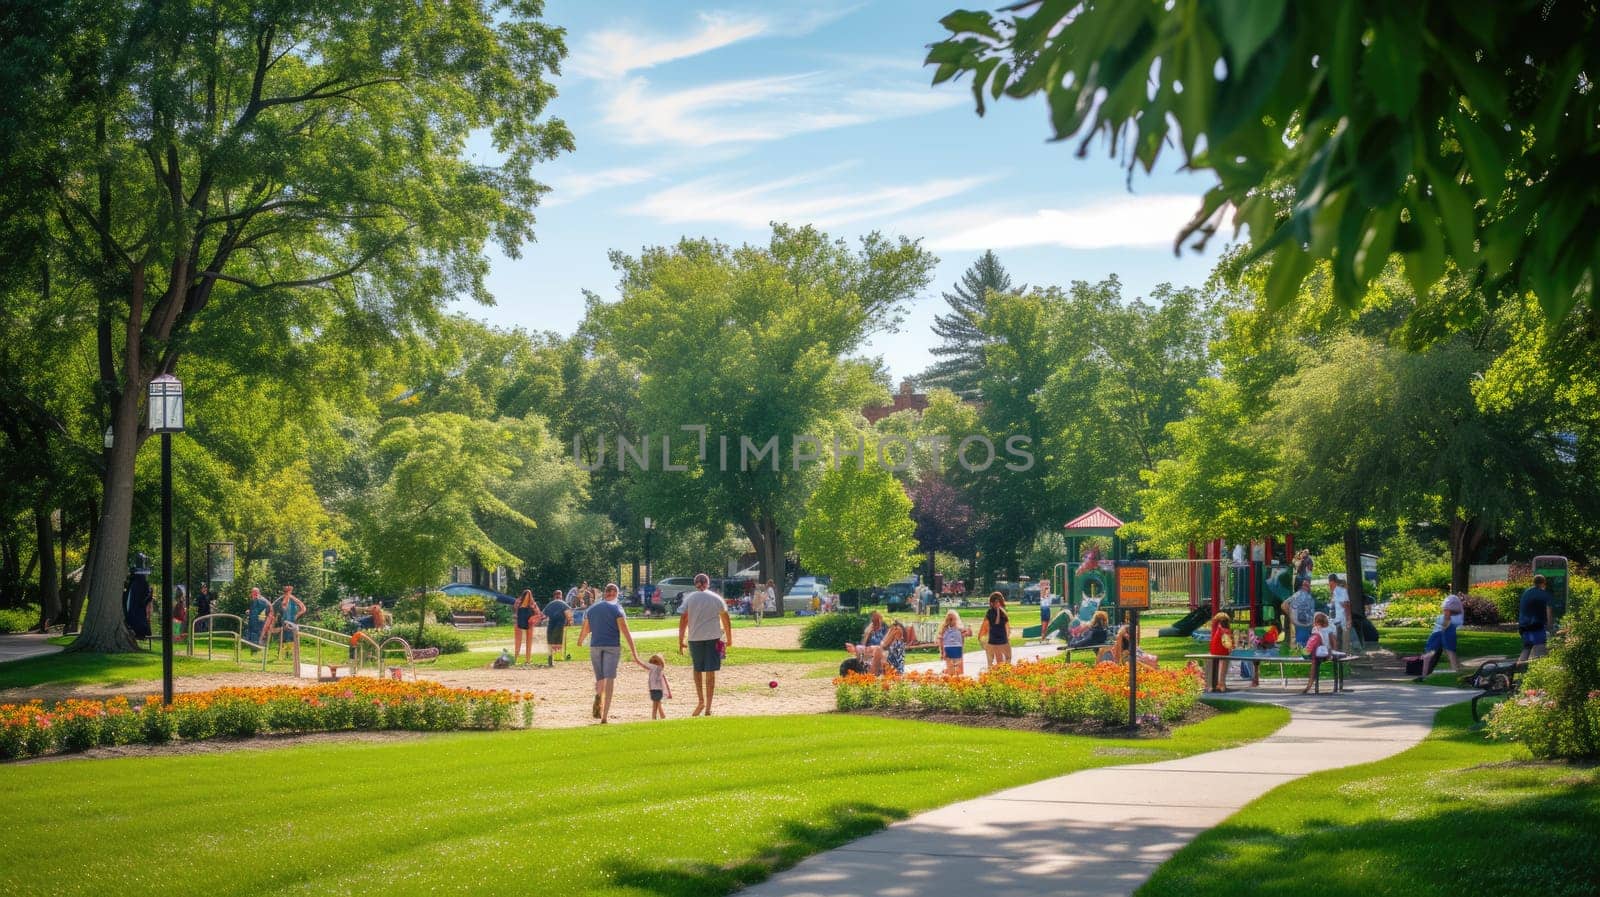 Nature landscape in park: people playing, trees, grass, and a playground AIG41 by biancoblue